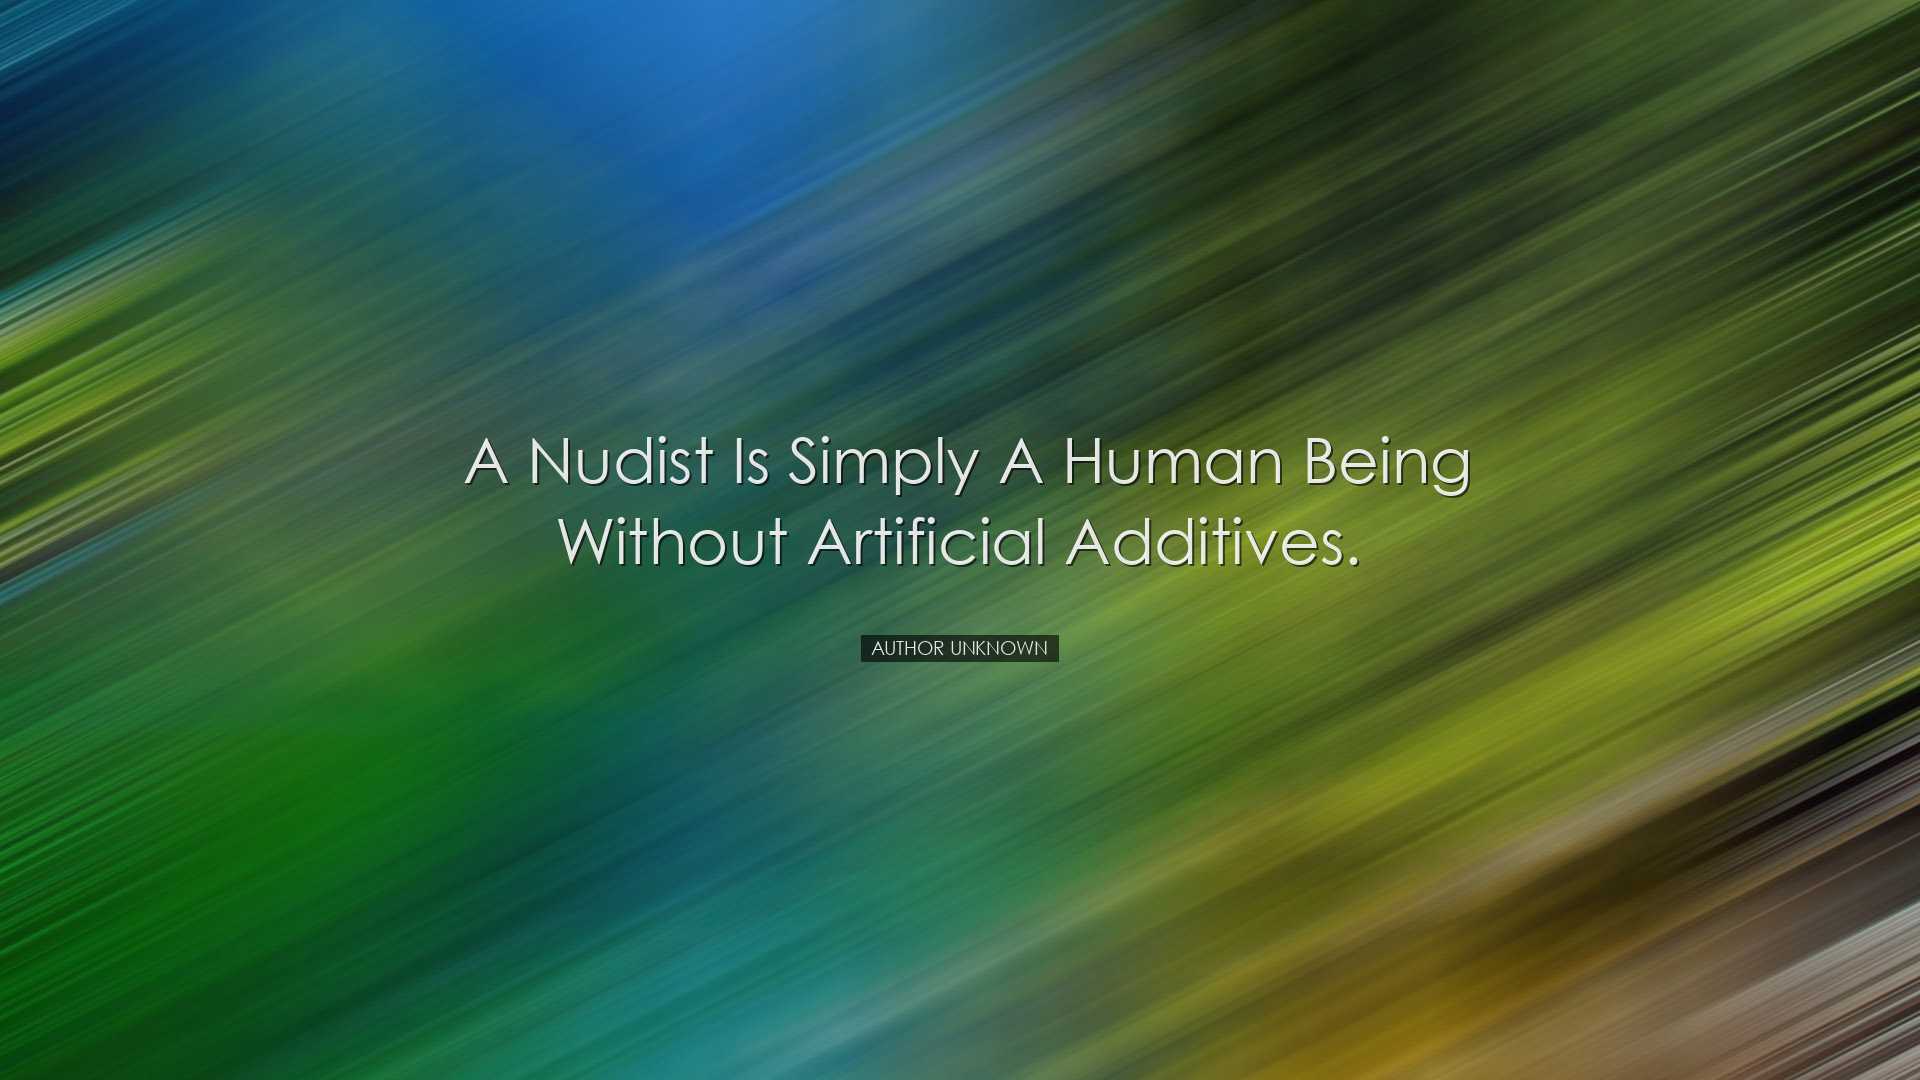 A nudist is simply a human being without artificial additives. -